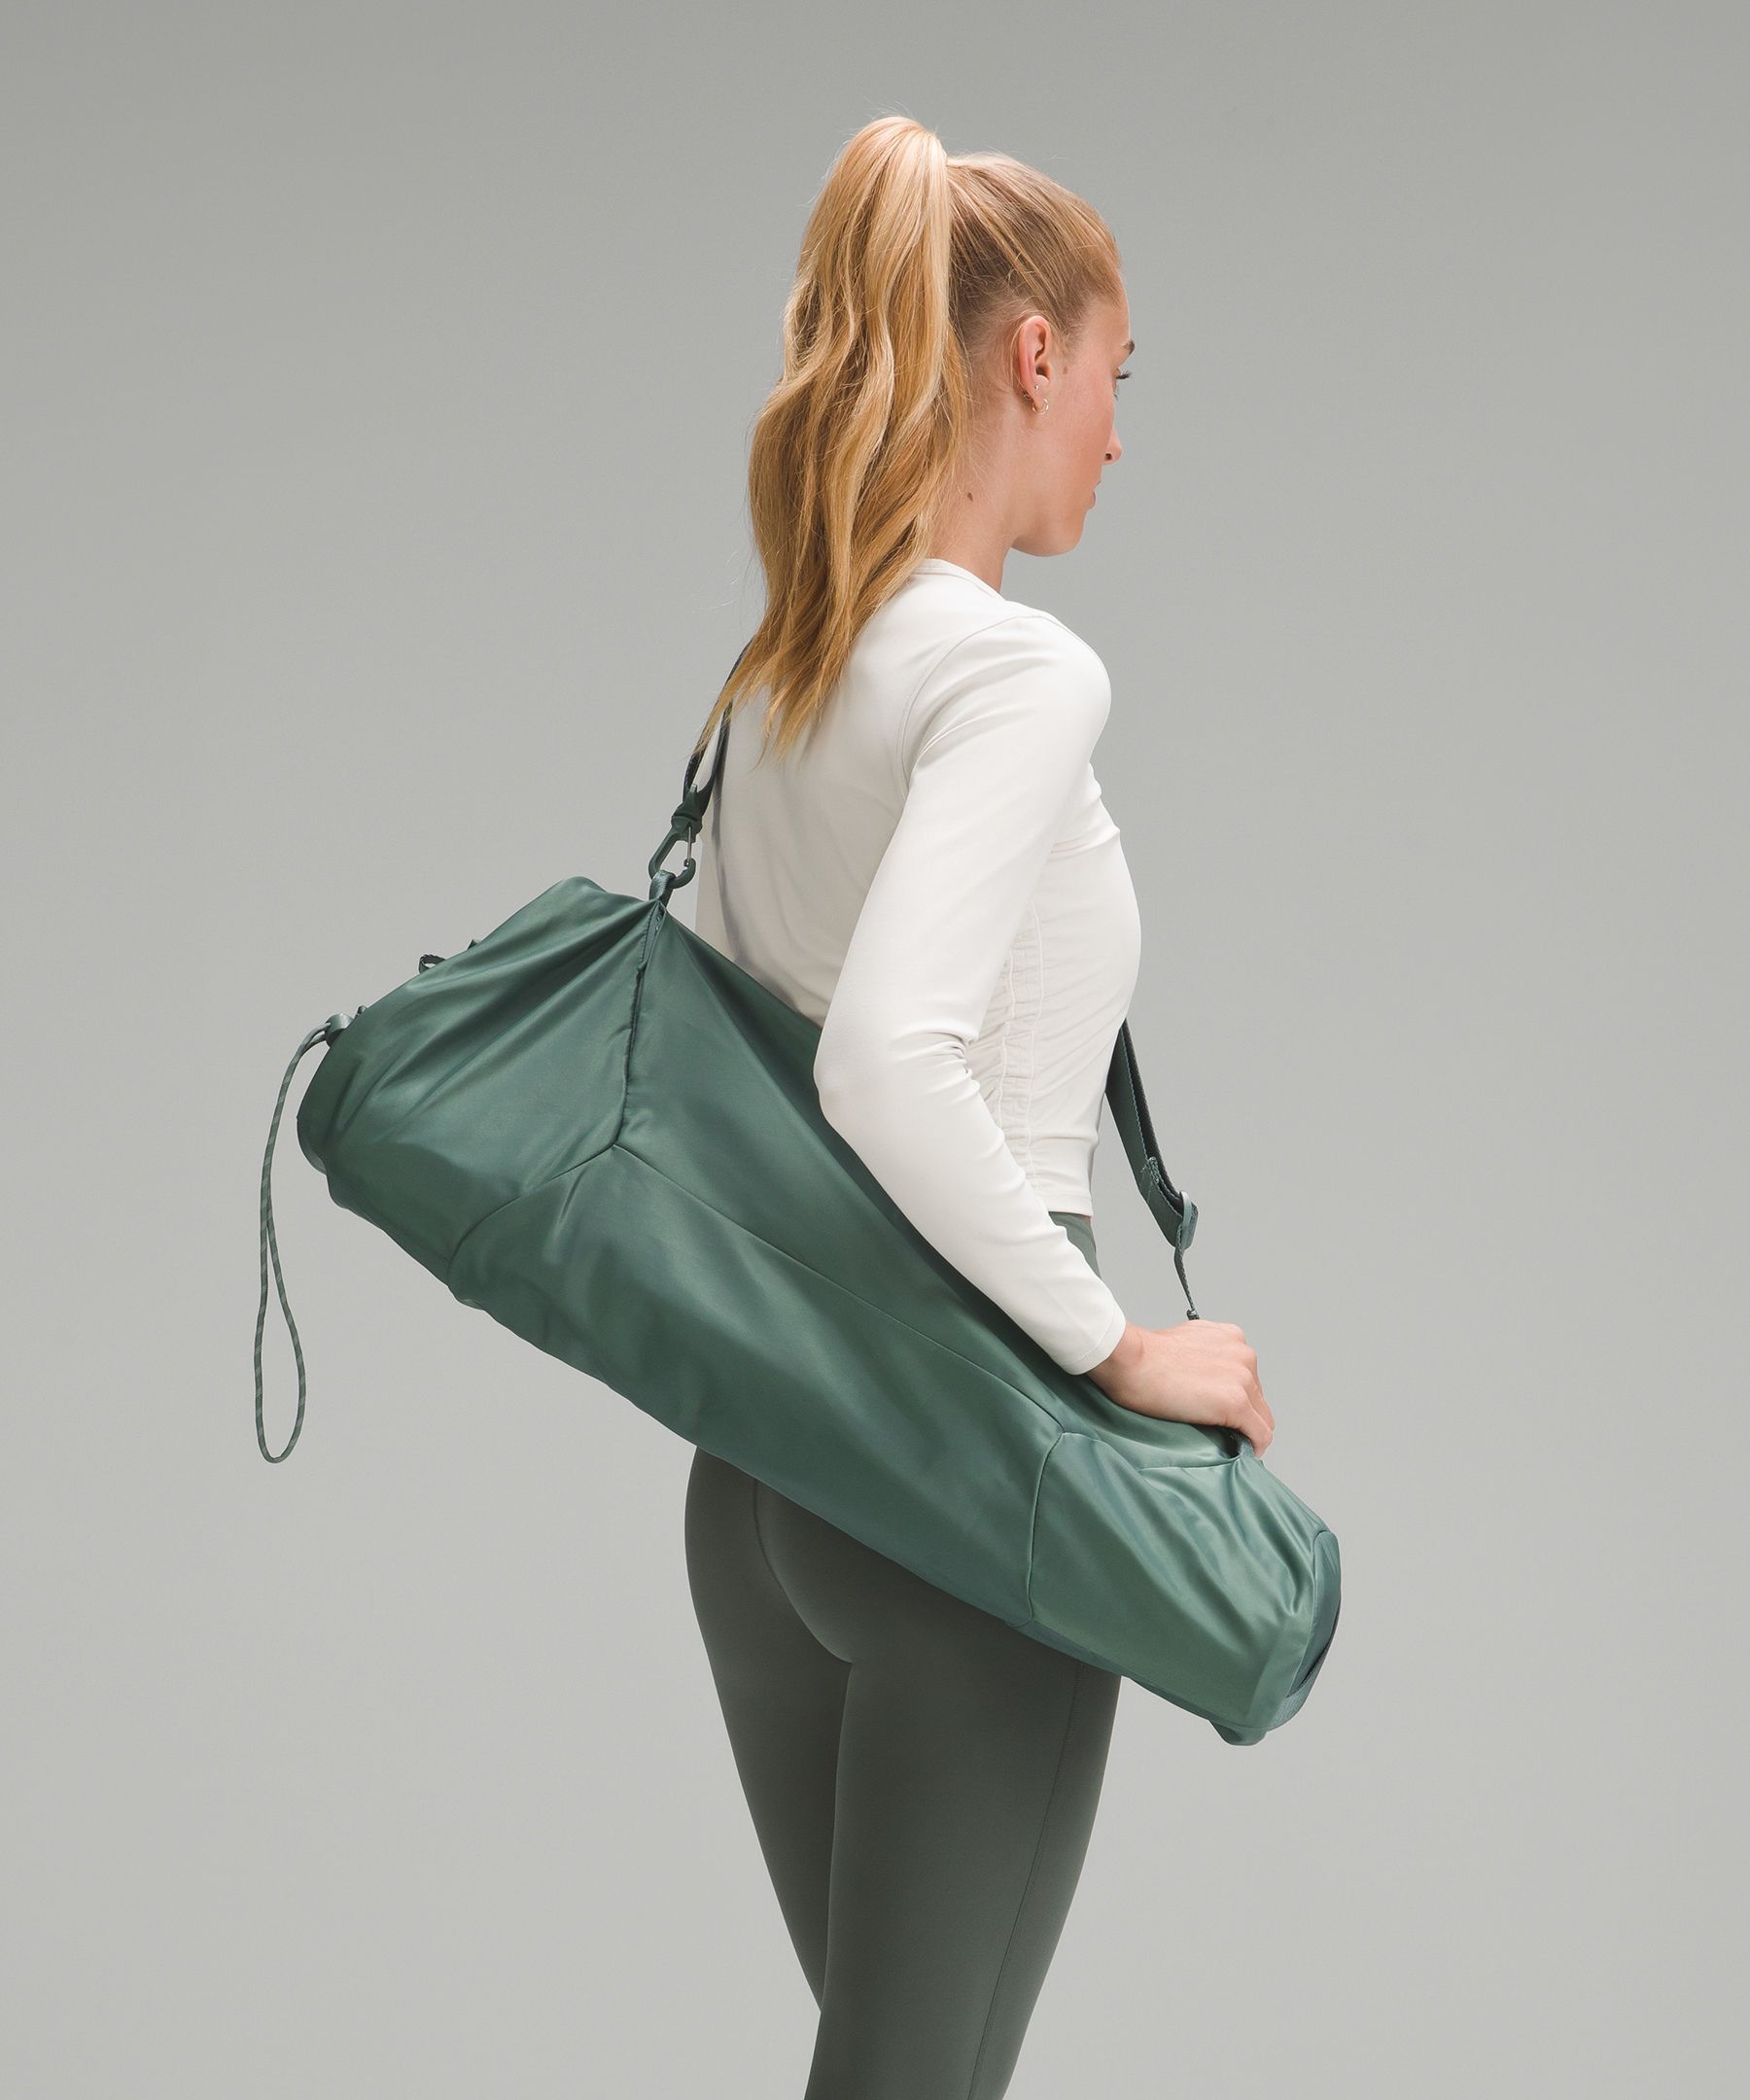 Lululemon Adjustable Yoga Mat Bag, 15 Yoga-Mat Bags That Make It Easier to  Show Up to Every Class